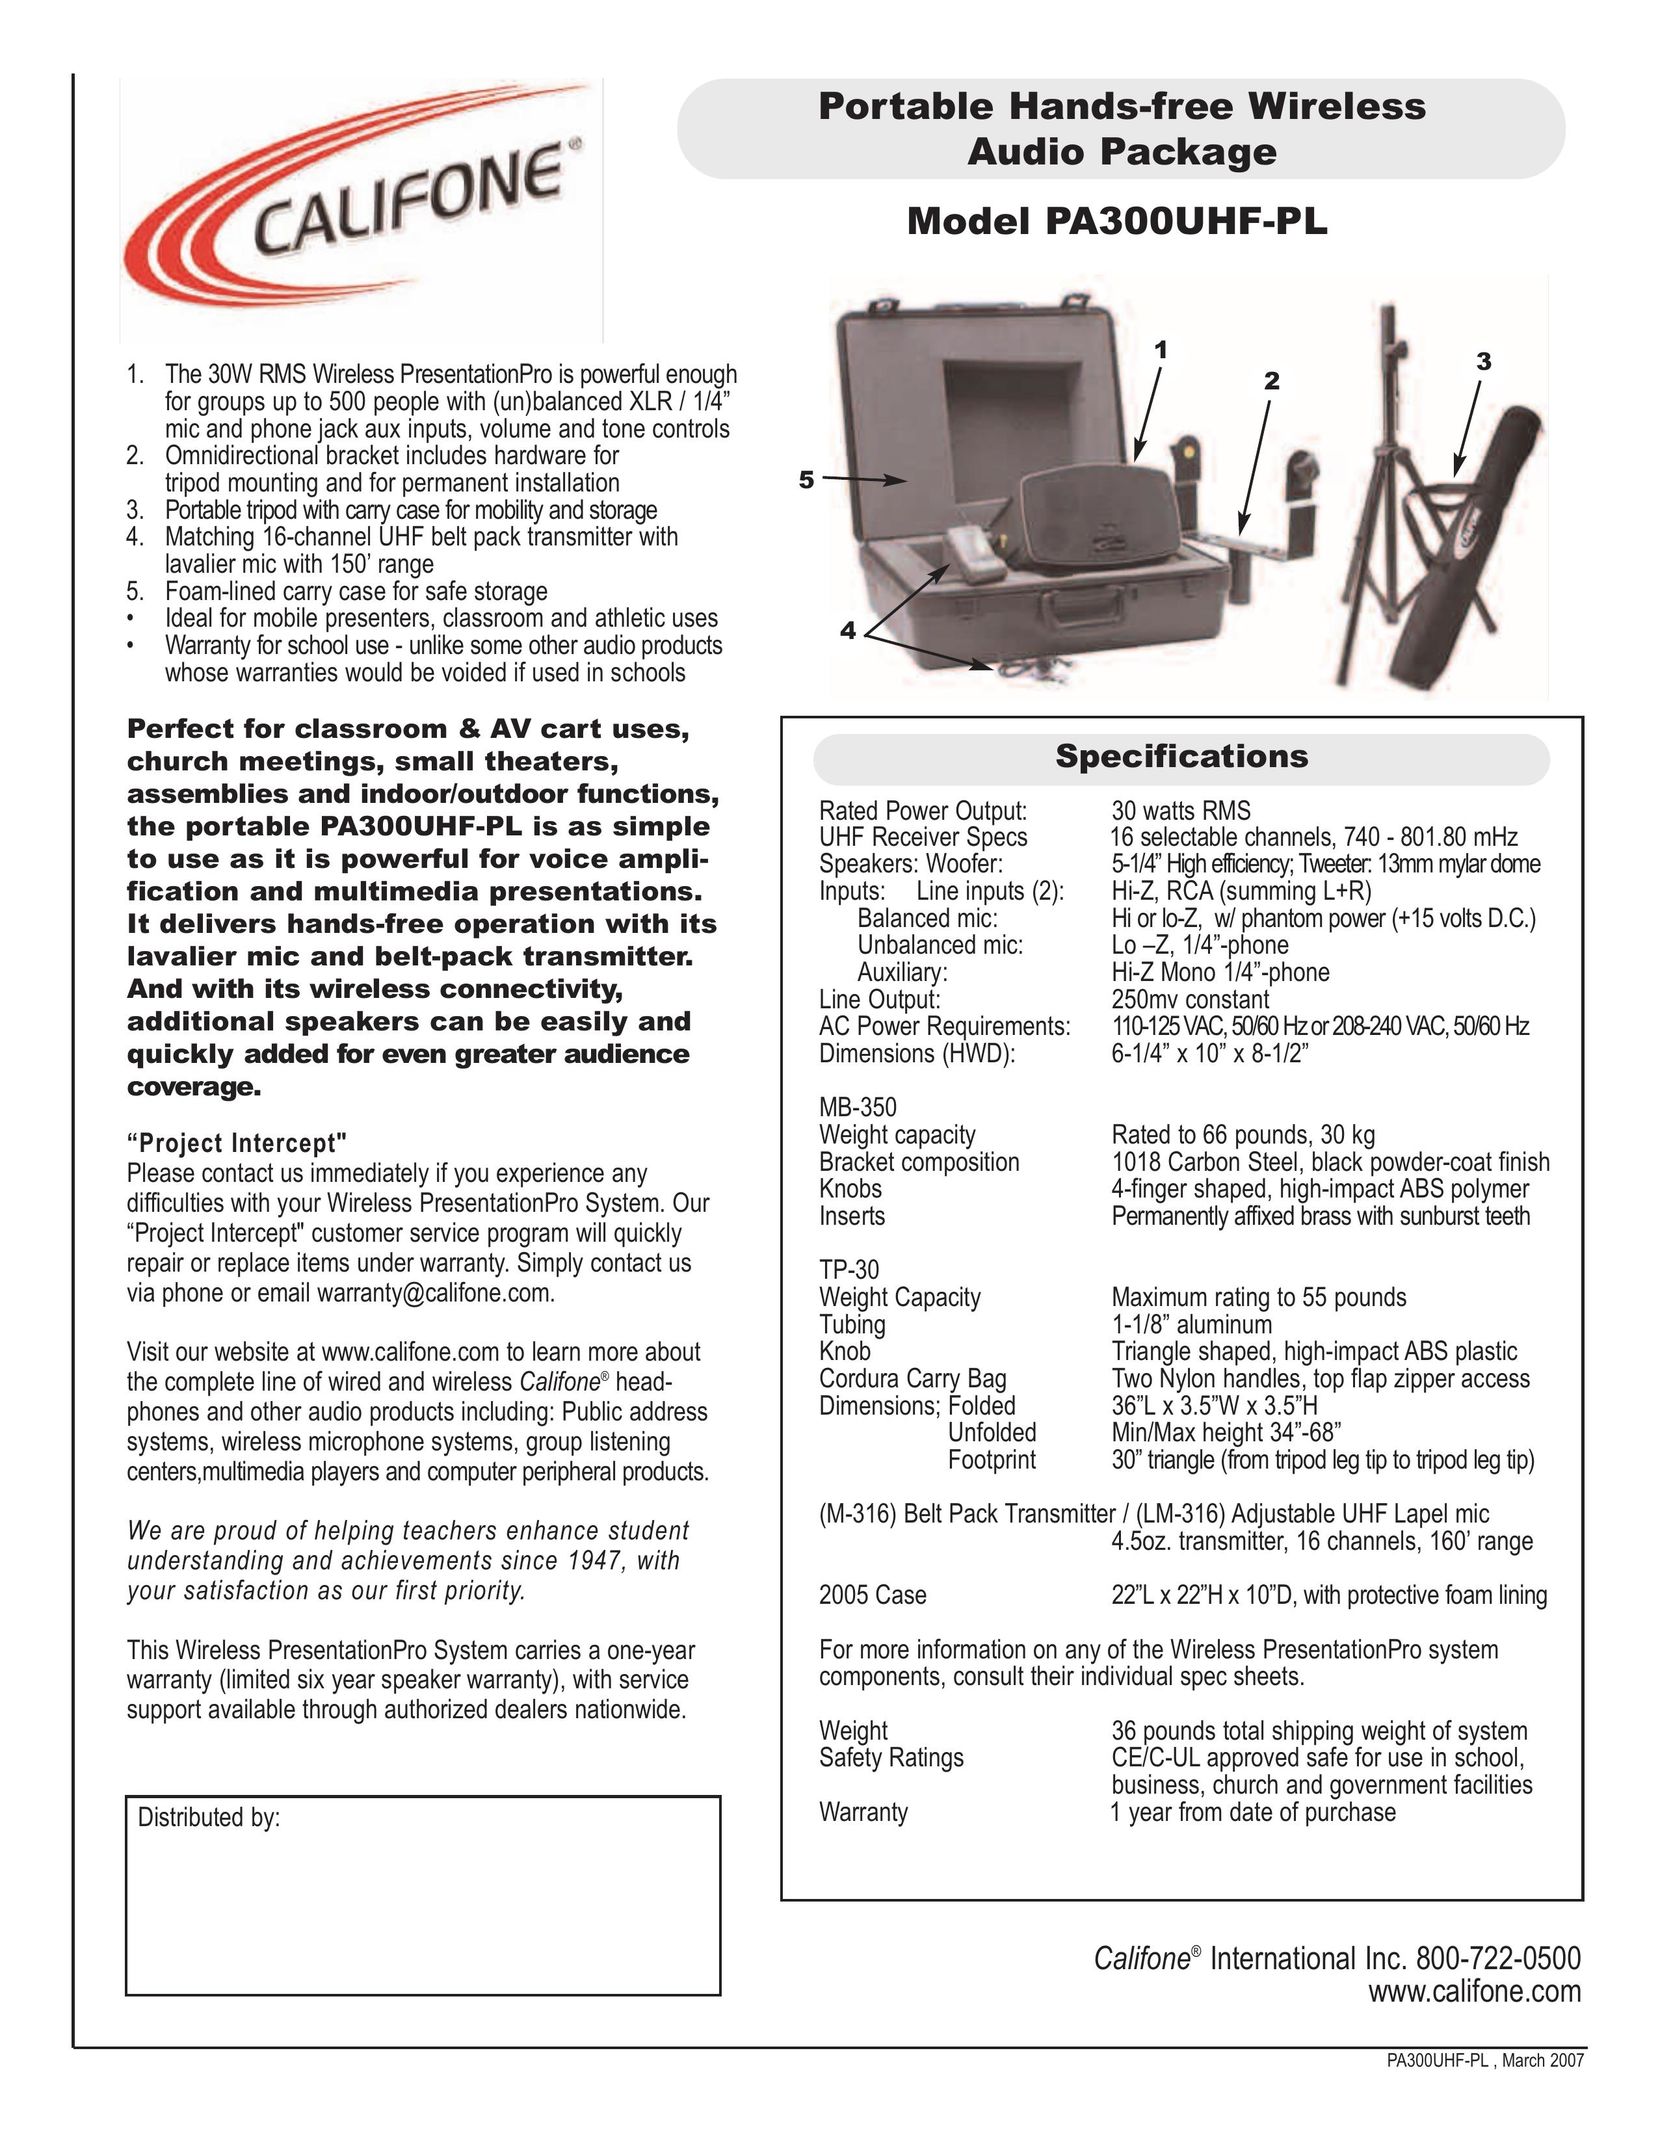 Califone PA300UHF-PL Stereo System User Manual